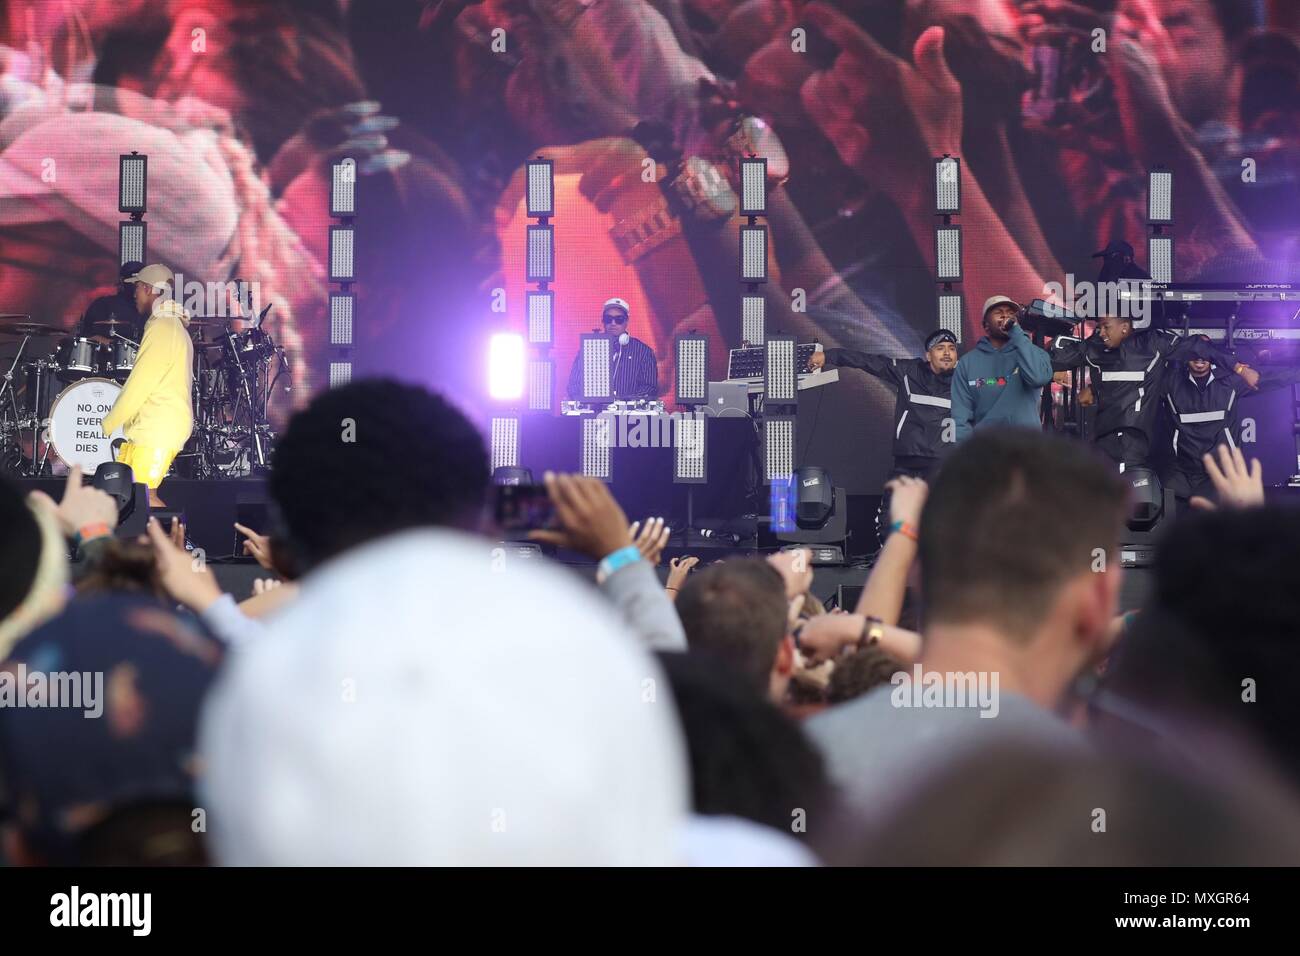 New York, NY, USA. 3rd June, 2018. Pharrell Williams of N.E.R.D. on stage for 2018 Governors Ball Music Festival - SUN, Randall's Island Park, New York, NY June 3, 2018. Credit: Rob Kim/Everett Collection/Alamy Live News Stock Photo